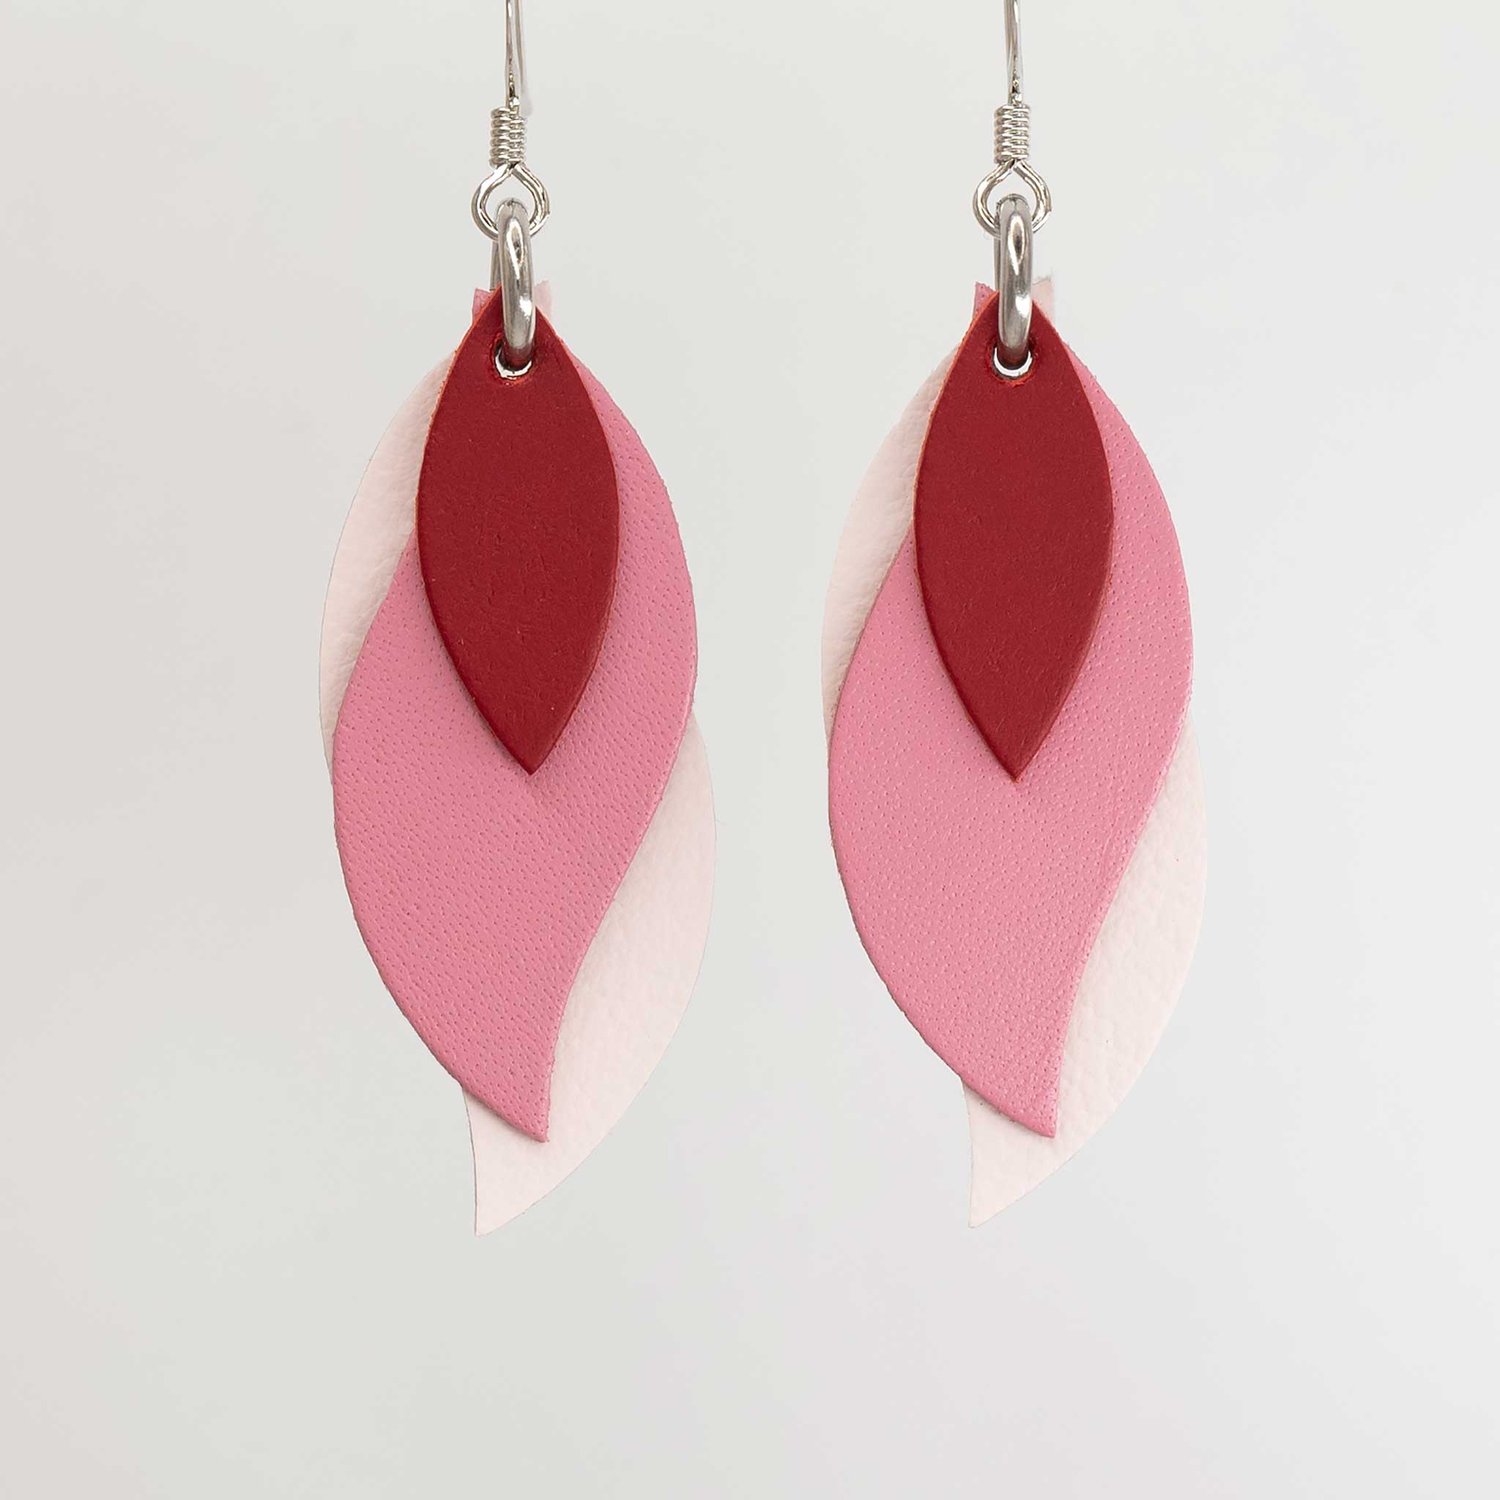 Image of Australian leather leaf earrings - red, pink, soft pink